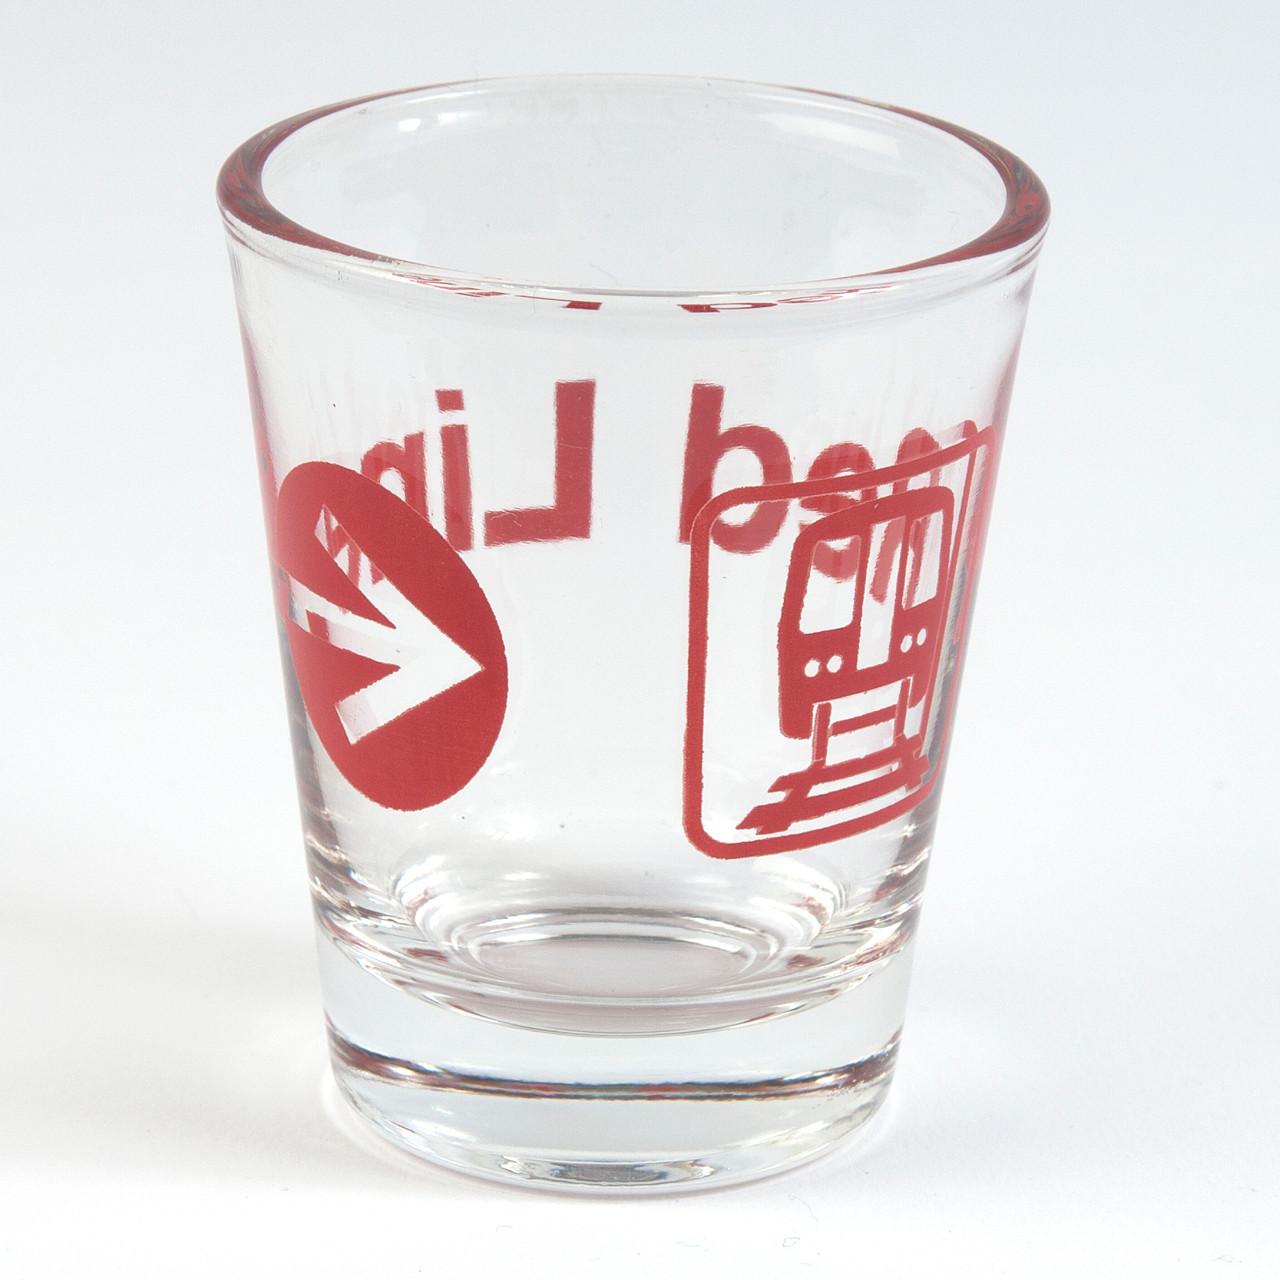 https://cdn11.bigcommerce.com/s-4np45xy/images/stencil/1280x1280/products/890/2618/Red_Line_Shot_Glass_2__94302.1701916110.jpg?c=2